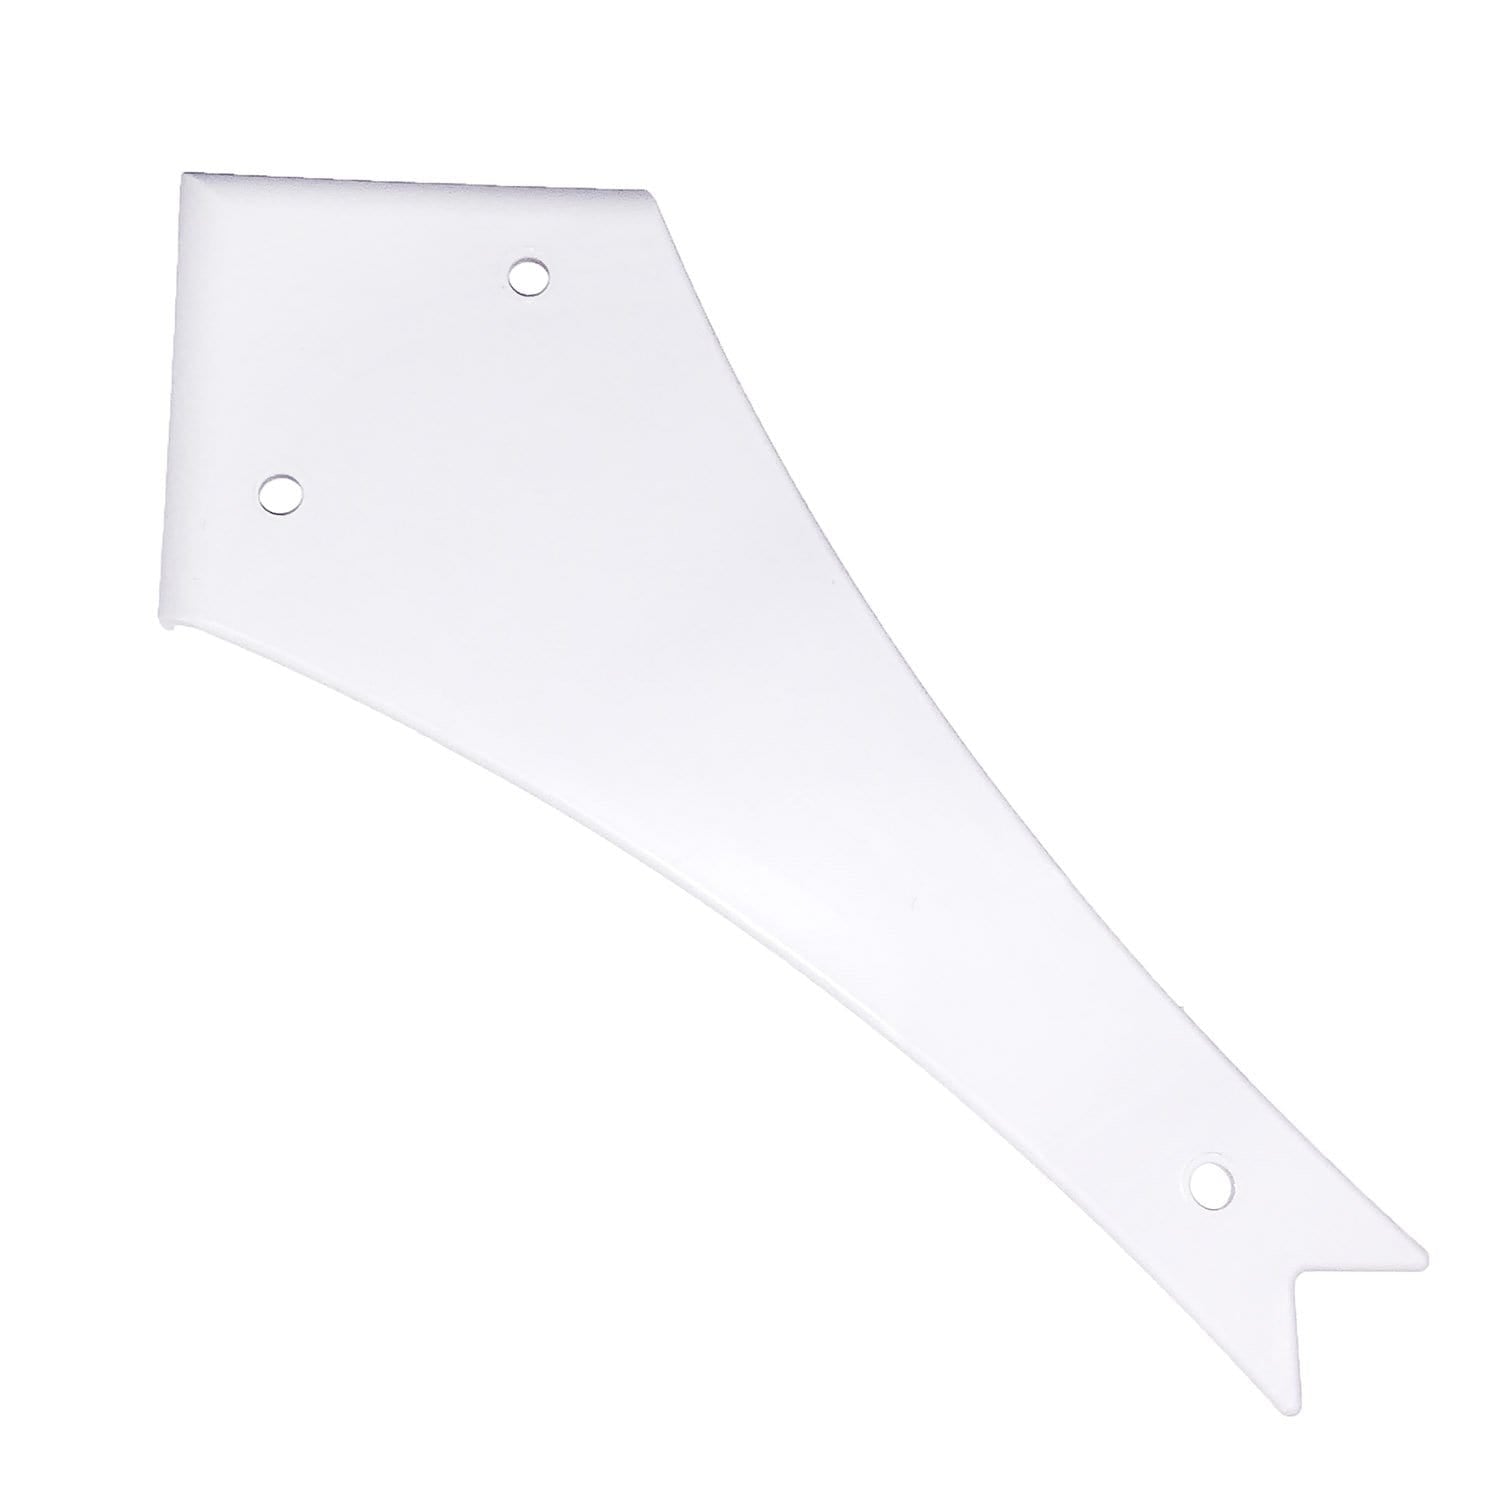 Thetford 94288 (601-022-94288) B&B Molders 4-1/2" Curved Corner Slide-Out Extrusion Cover, White